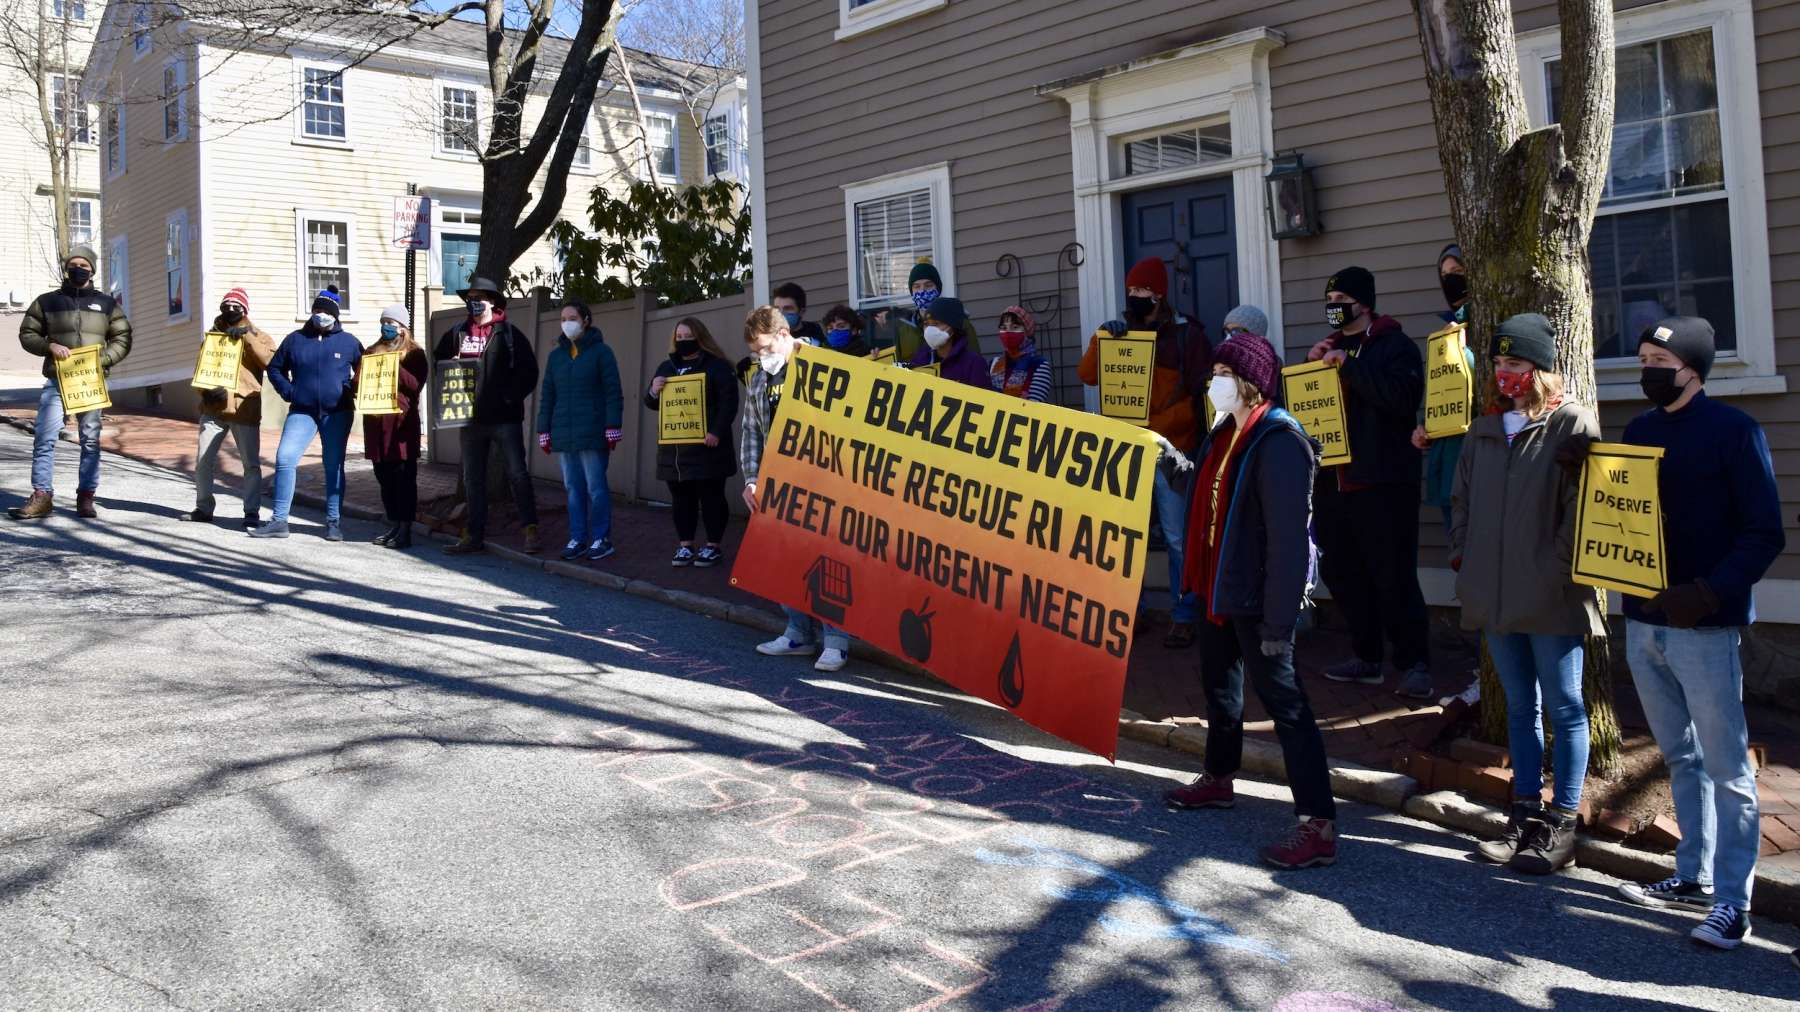 Sunrise wants Majority Leader Blazejewski to actually support the Green New Deal